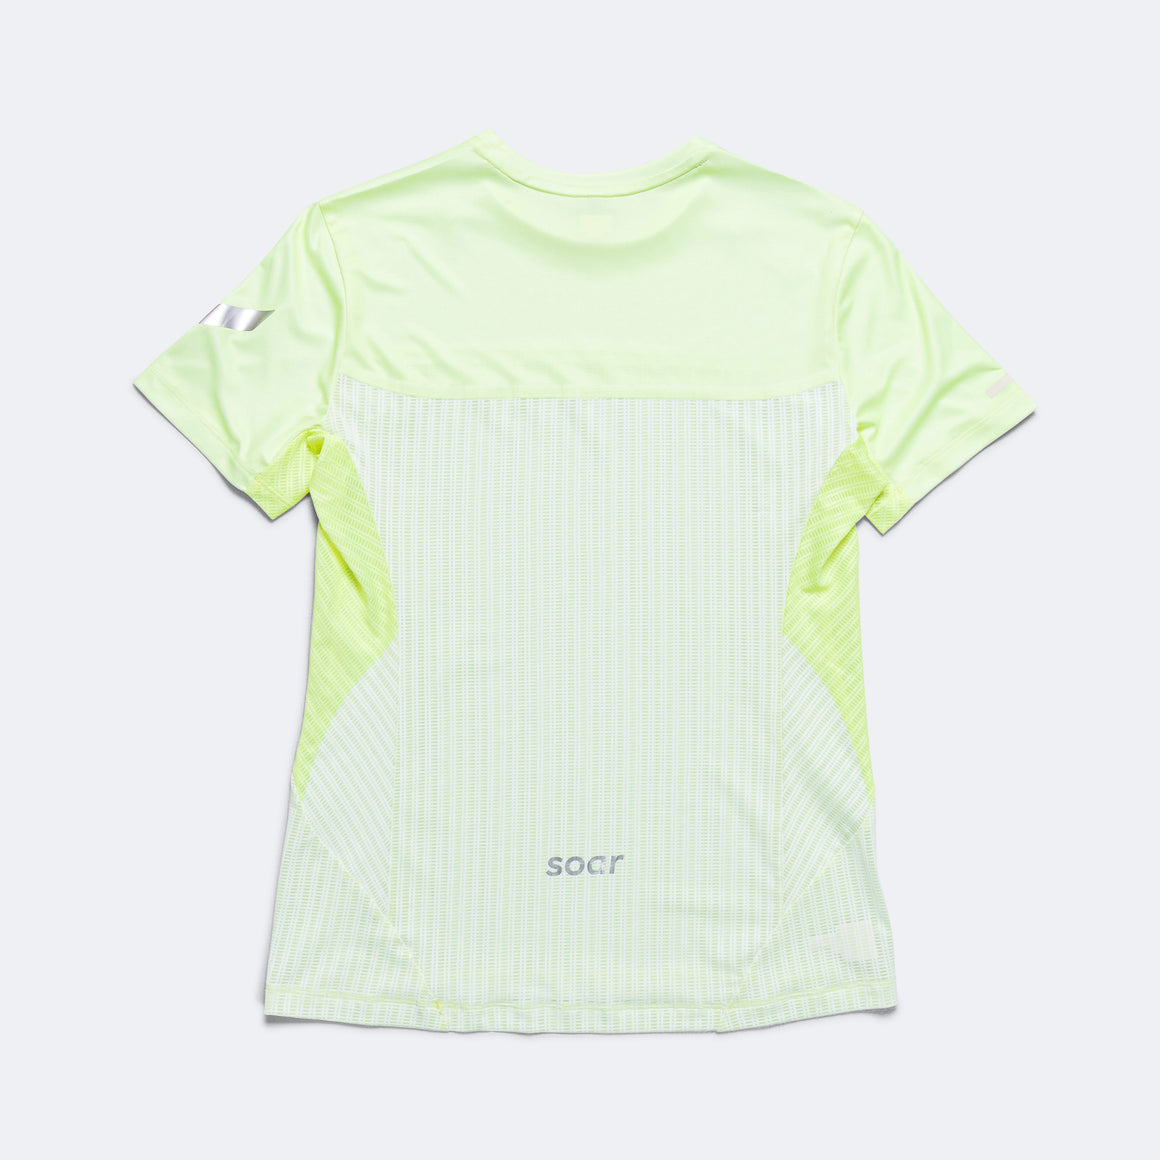 Soar - Womens Hot Weather T-Shirt - Fluro Yello - Up There Athletics